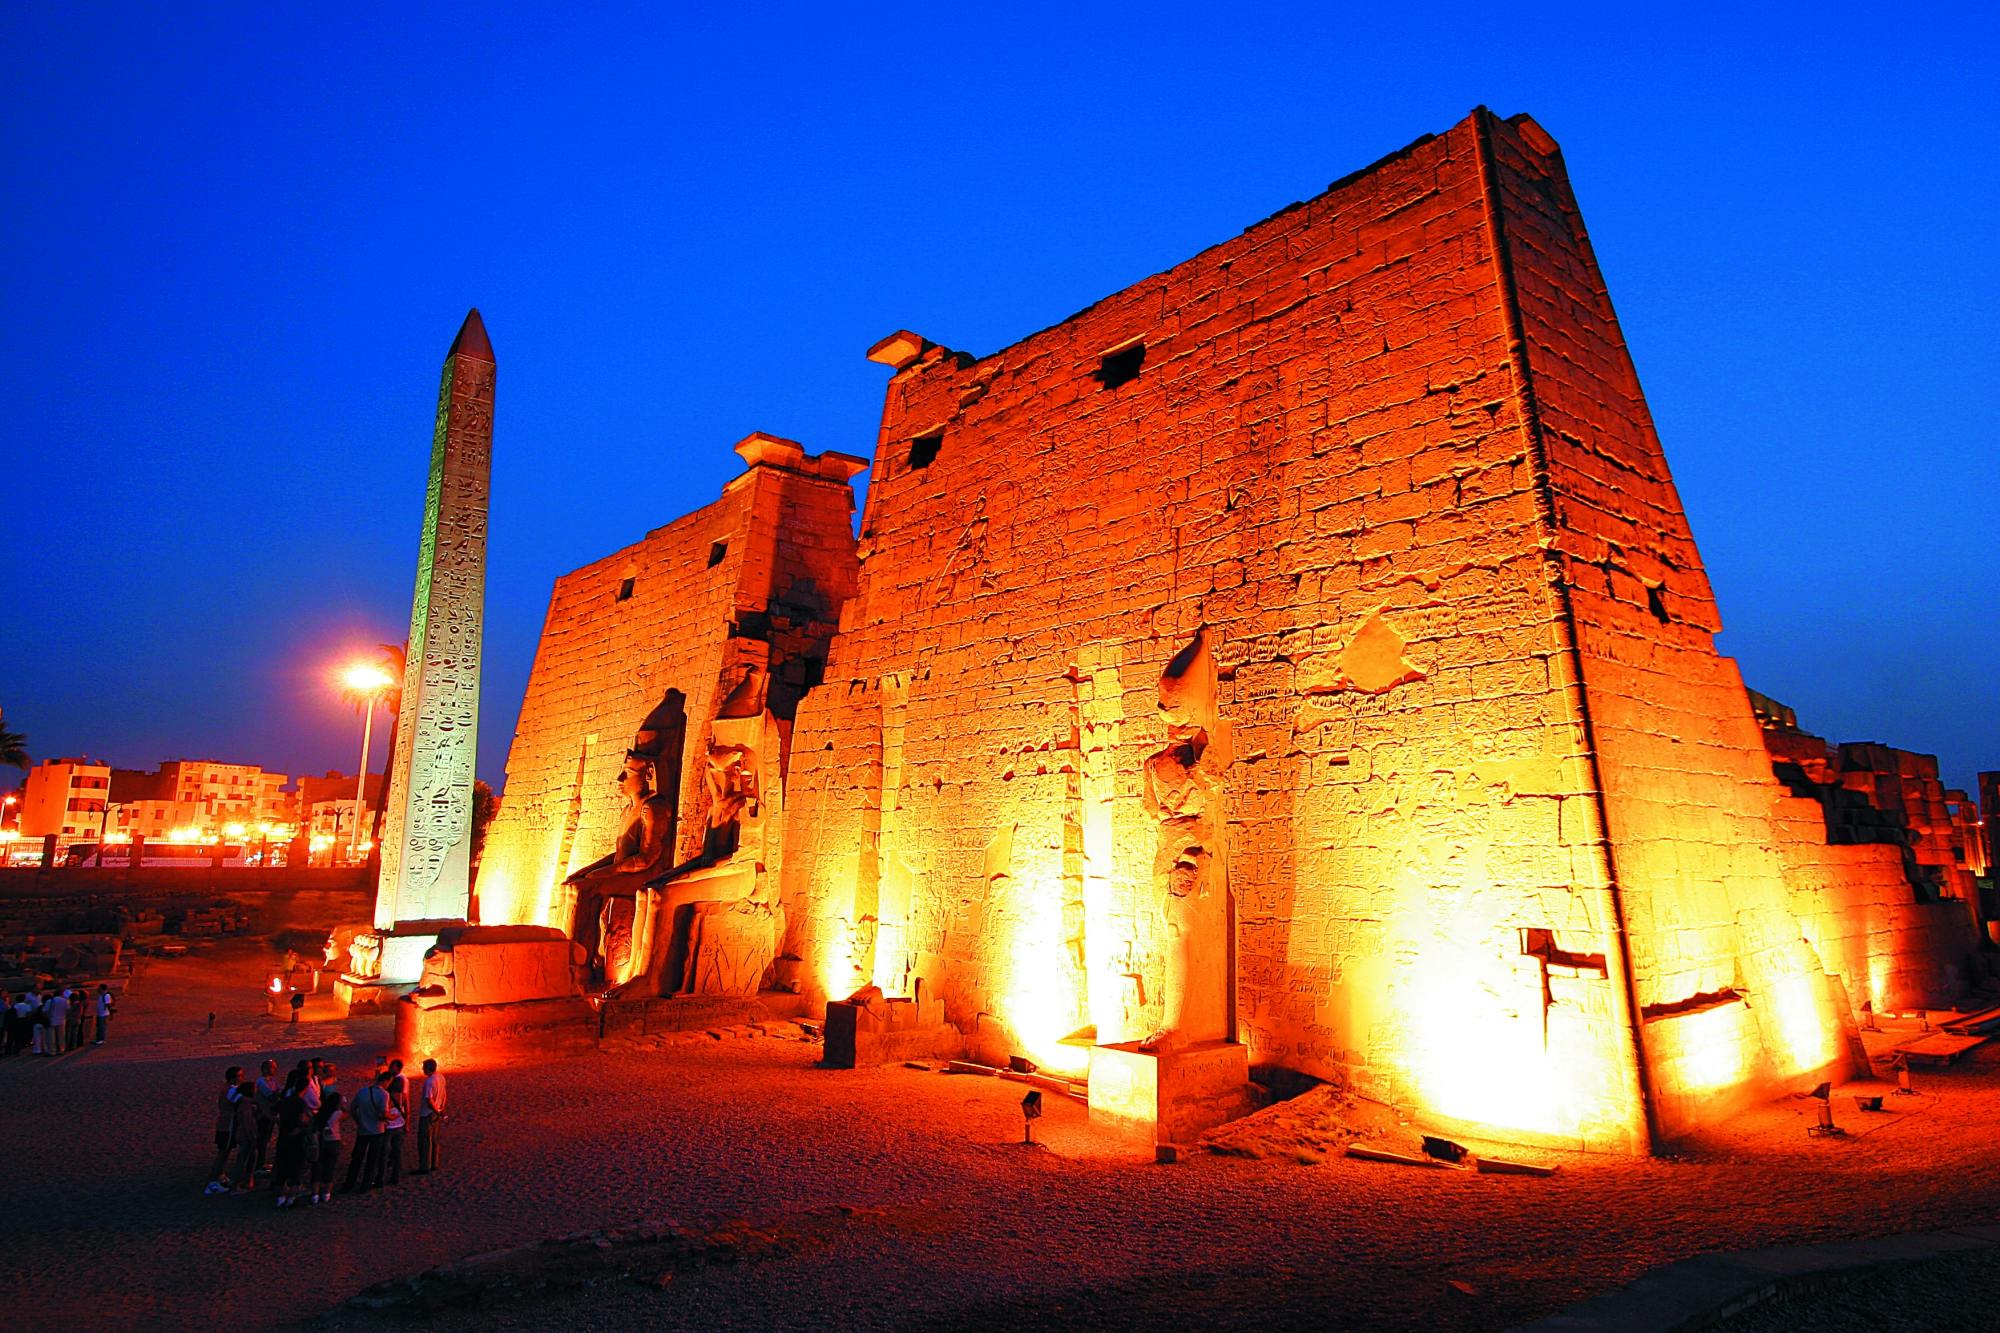 Nile Felucca sunset tour with Luxor Temple by night Musement